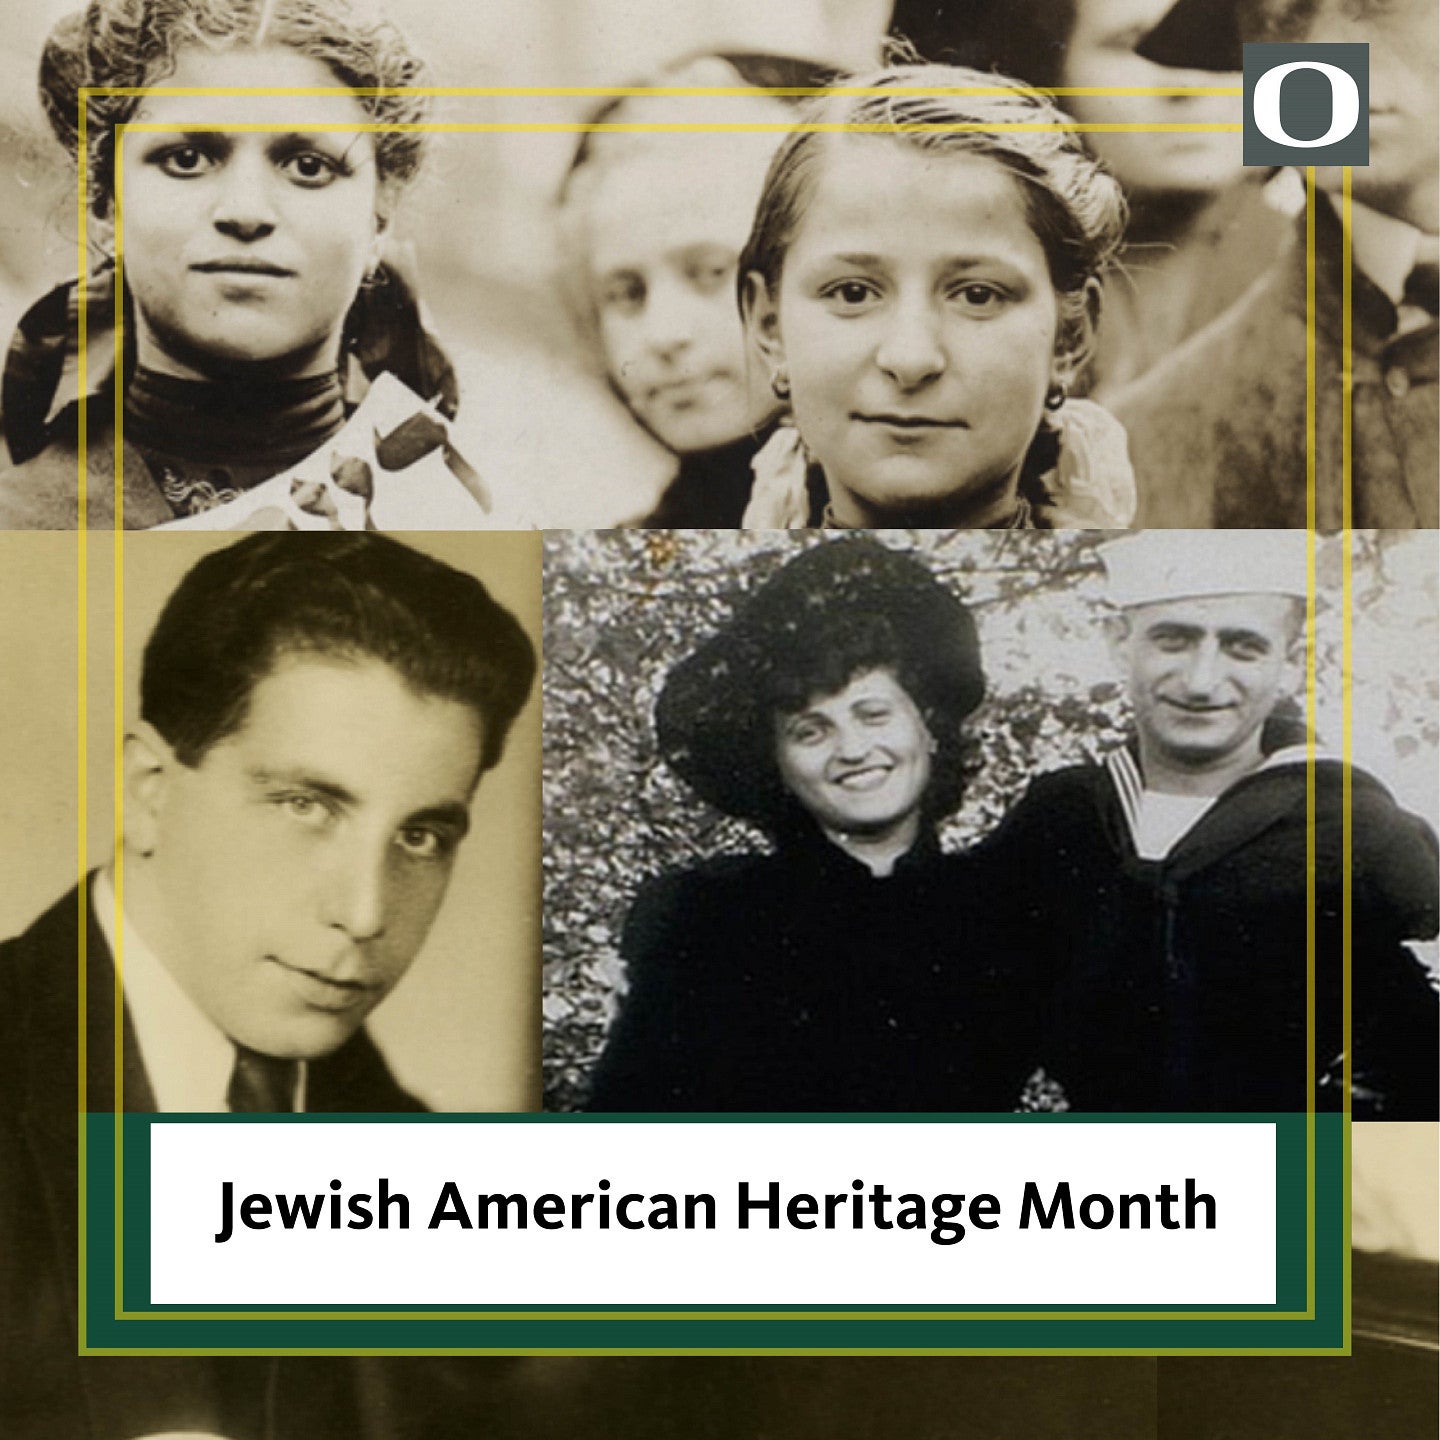 Historical images of Jewish individuals